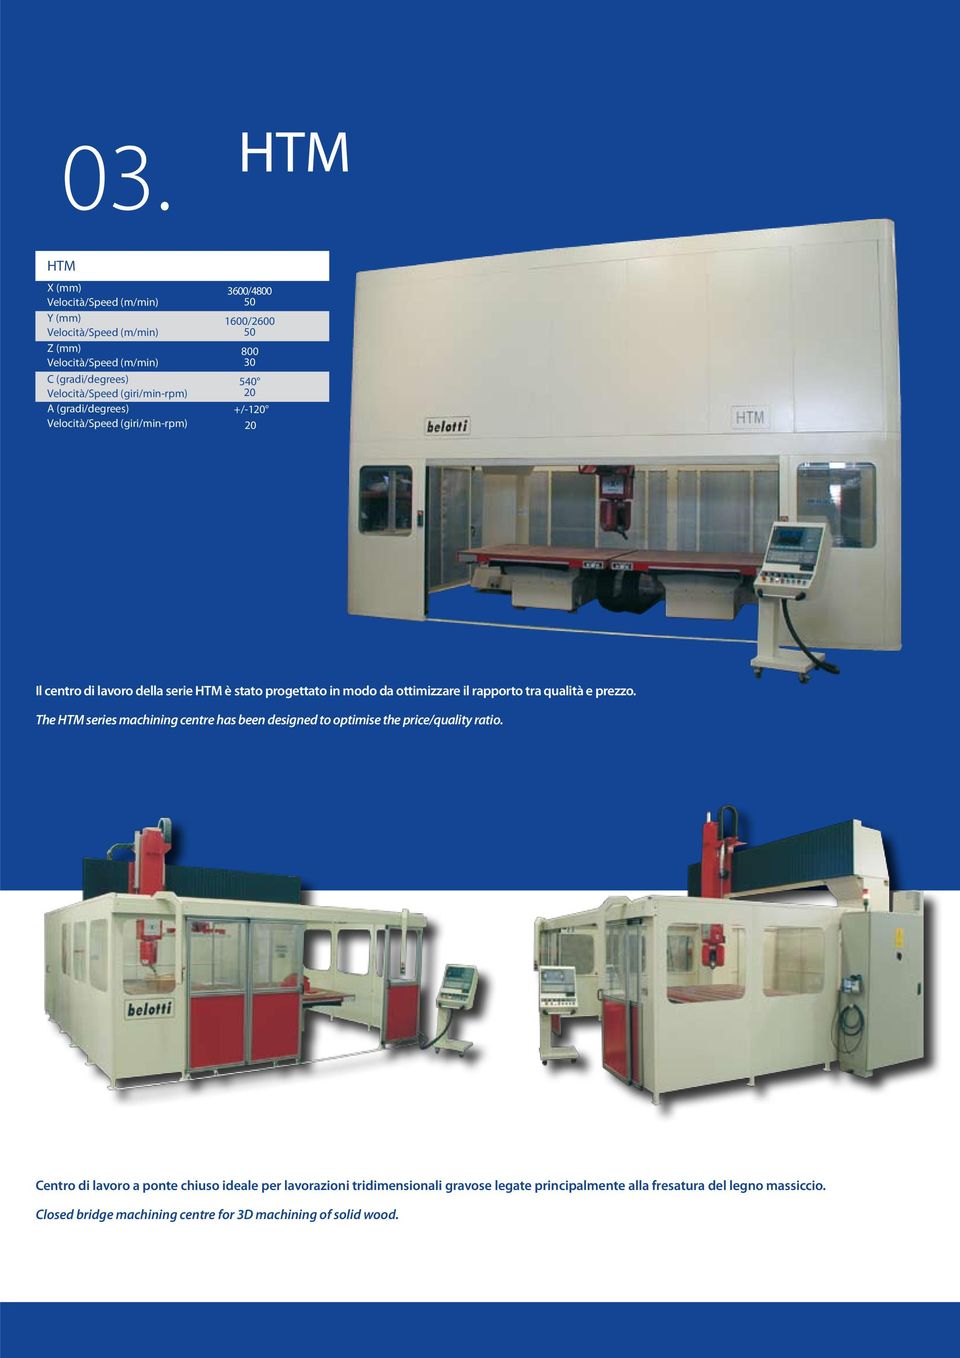 prezzo. The HTM series machining centre has been designed to optimise the price/quality ratio.